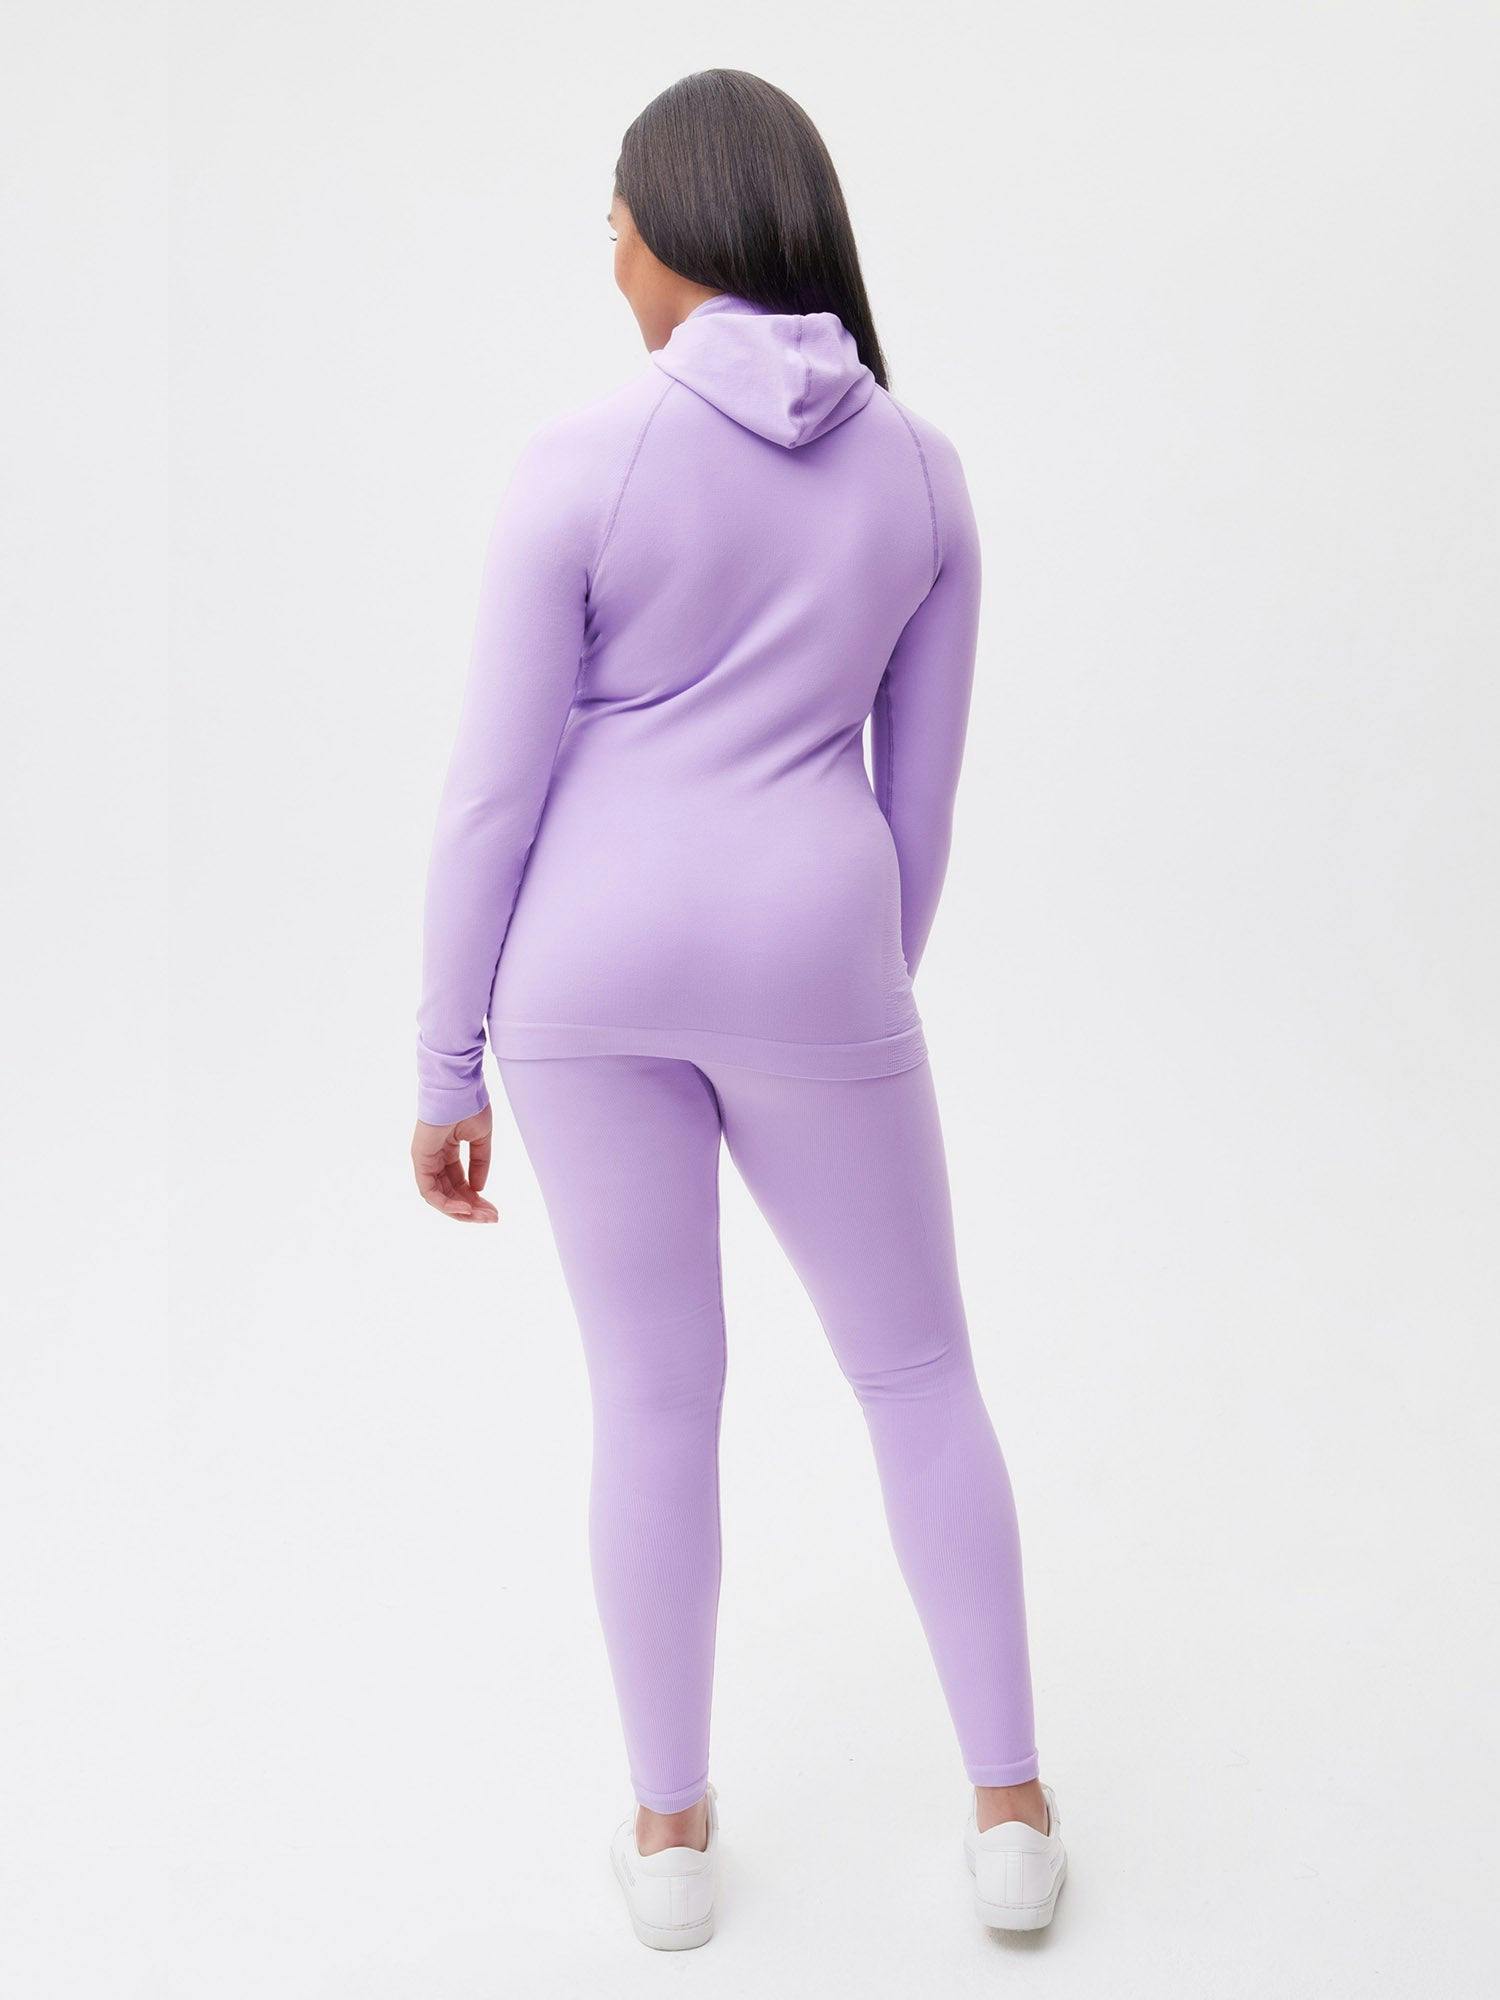 https://cdn.shopify.com/s/files/1/0035/1309/0115/products/Activewear-Womens-Hoodie-Orchid-Purple-2.jpg?v=1662475879